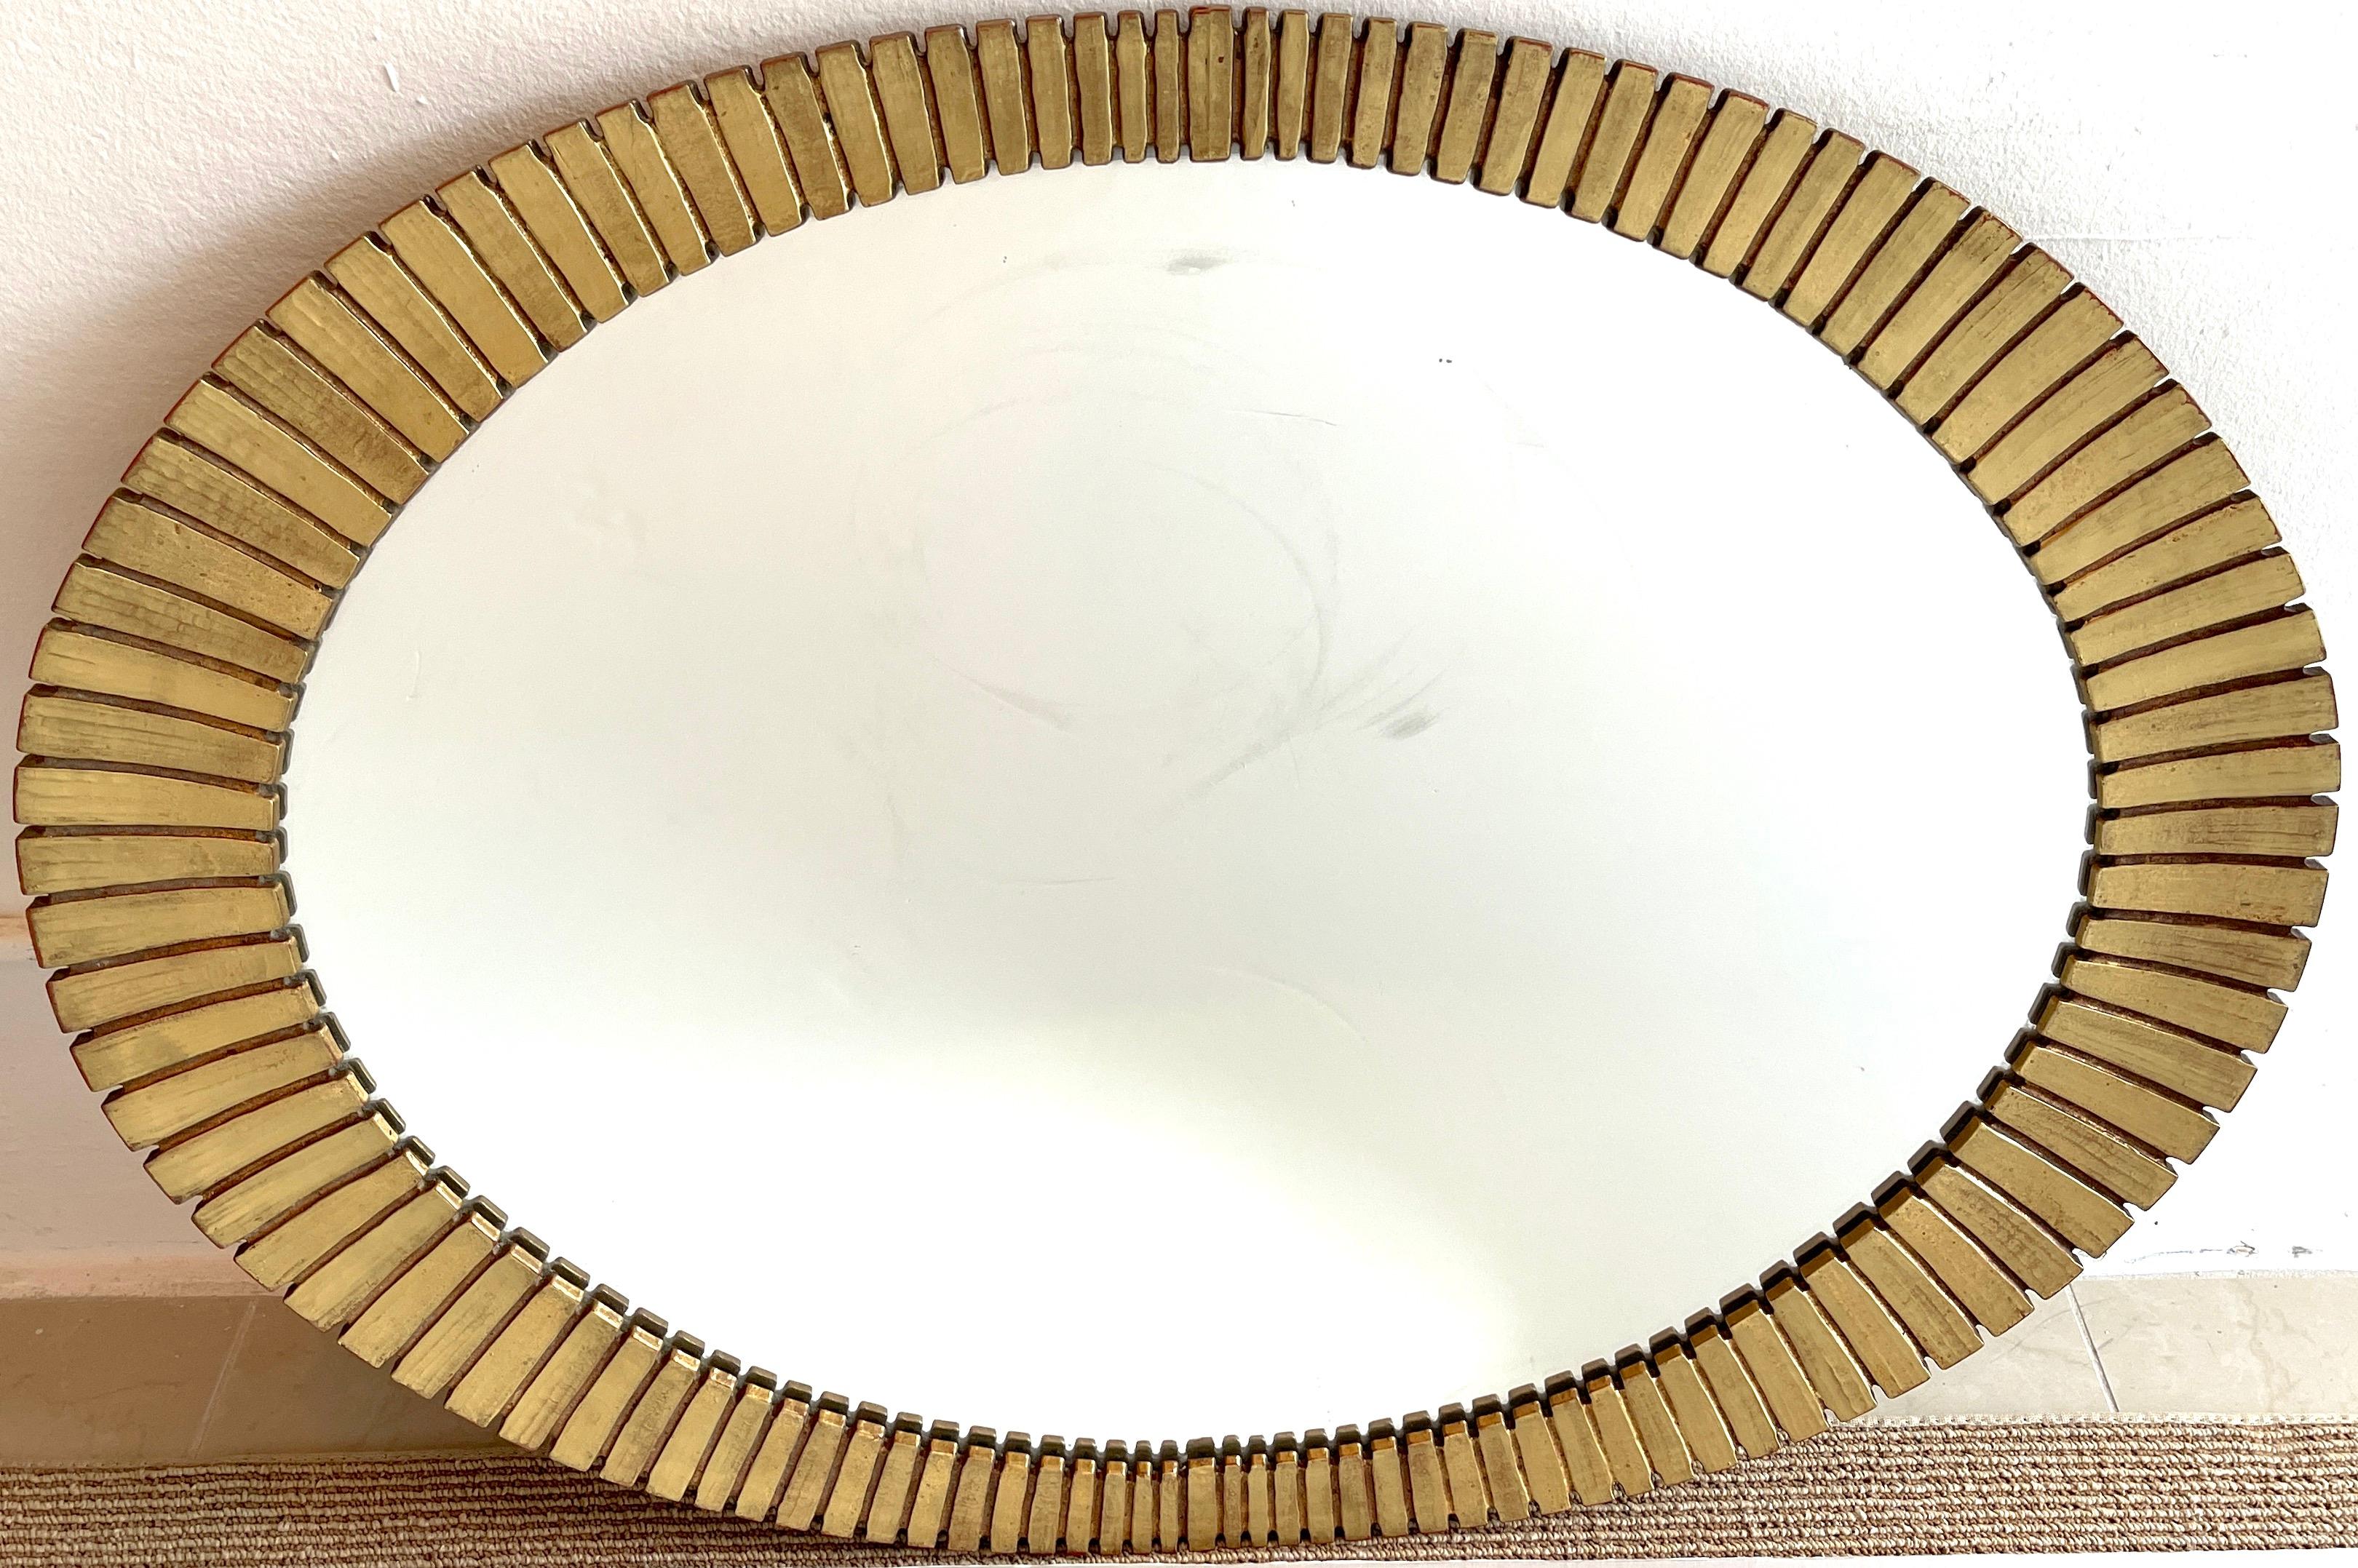 Mid Century Gilt Lacquer 'Eyelash' Segmented Mirror, Oval lacquered resin mirror, beautiful patina with some red bole showing. The inset mirror measures 30